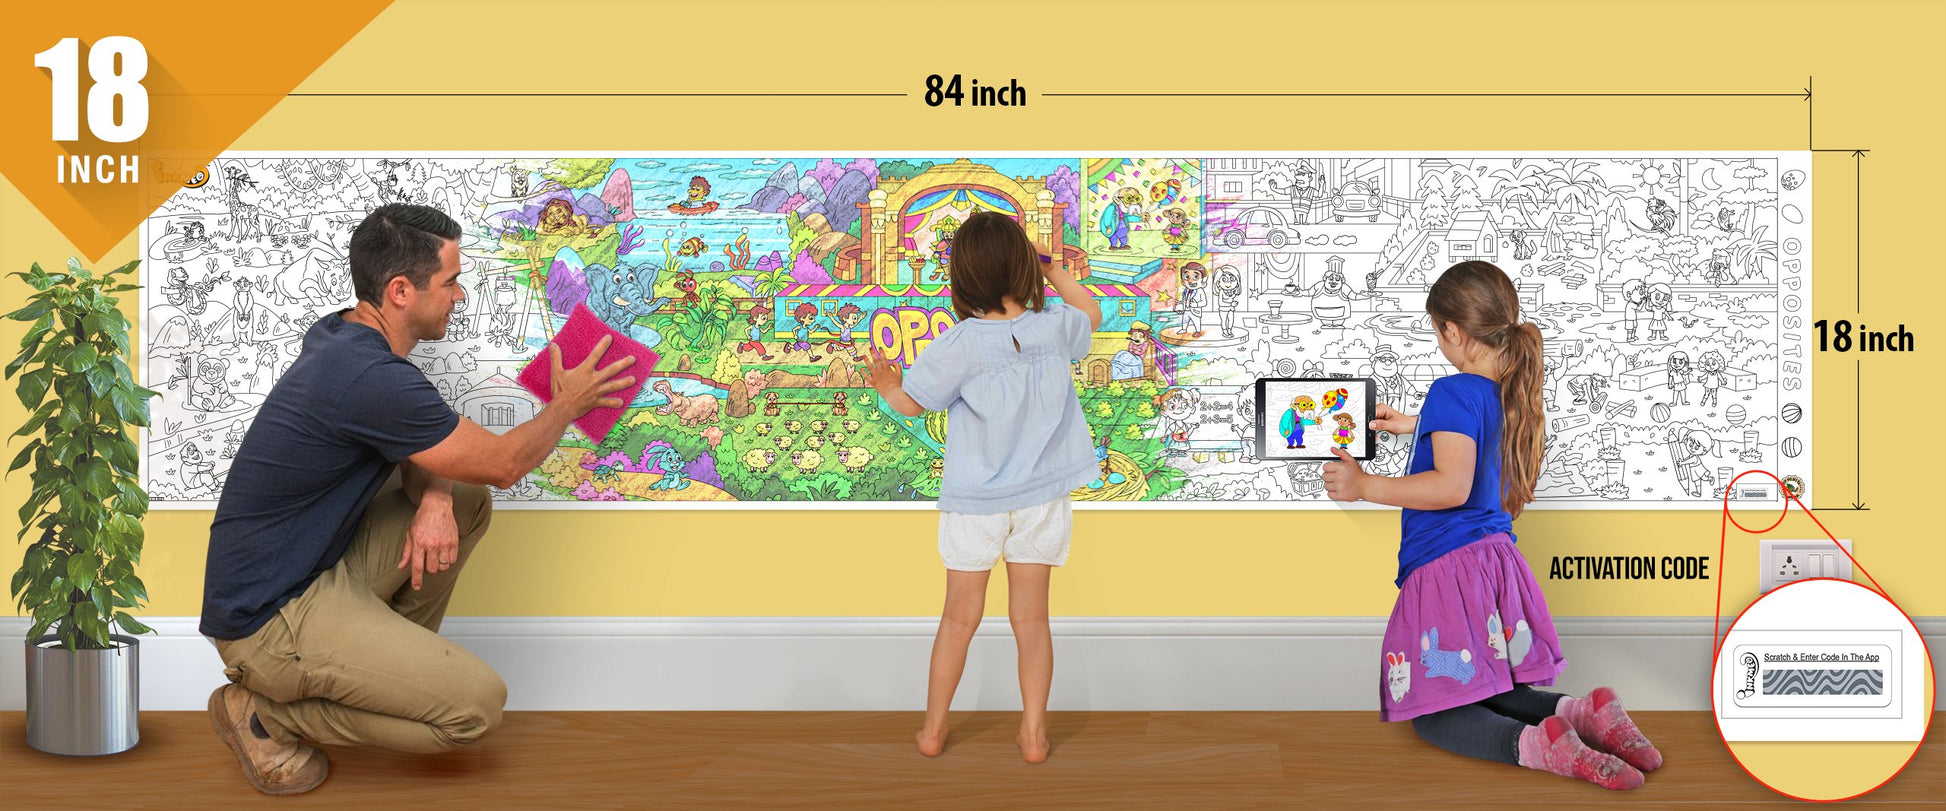 The image depicts a father and his two daughters enjoying a bonding moment while colouring and playing with opposites roll attached to the wall.